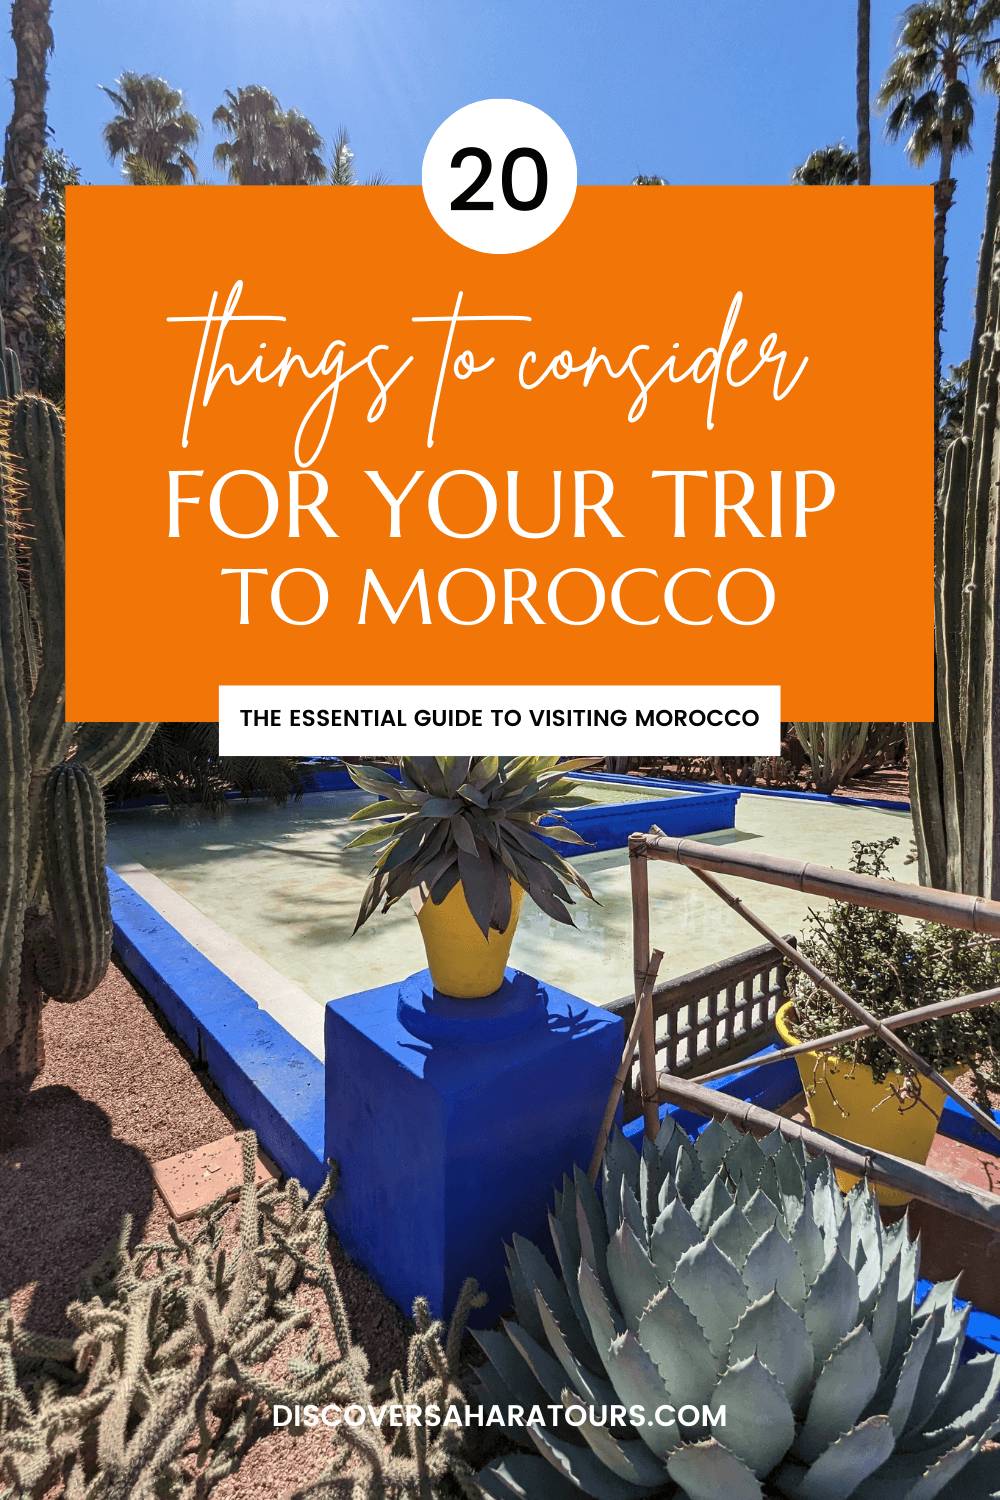 Featured image for “The Essential Guide to Visiting Morocco”